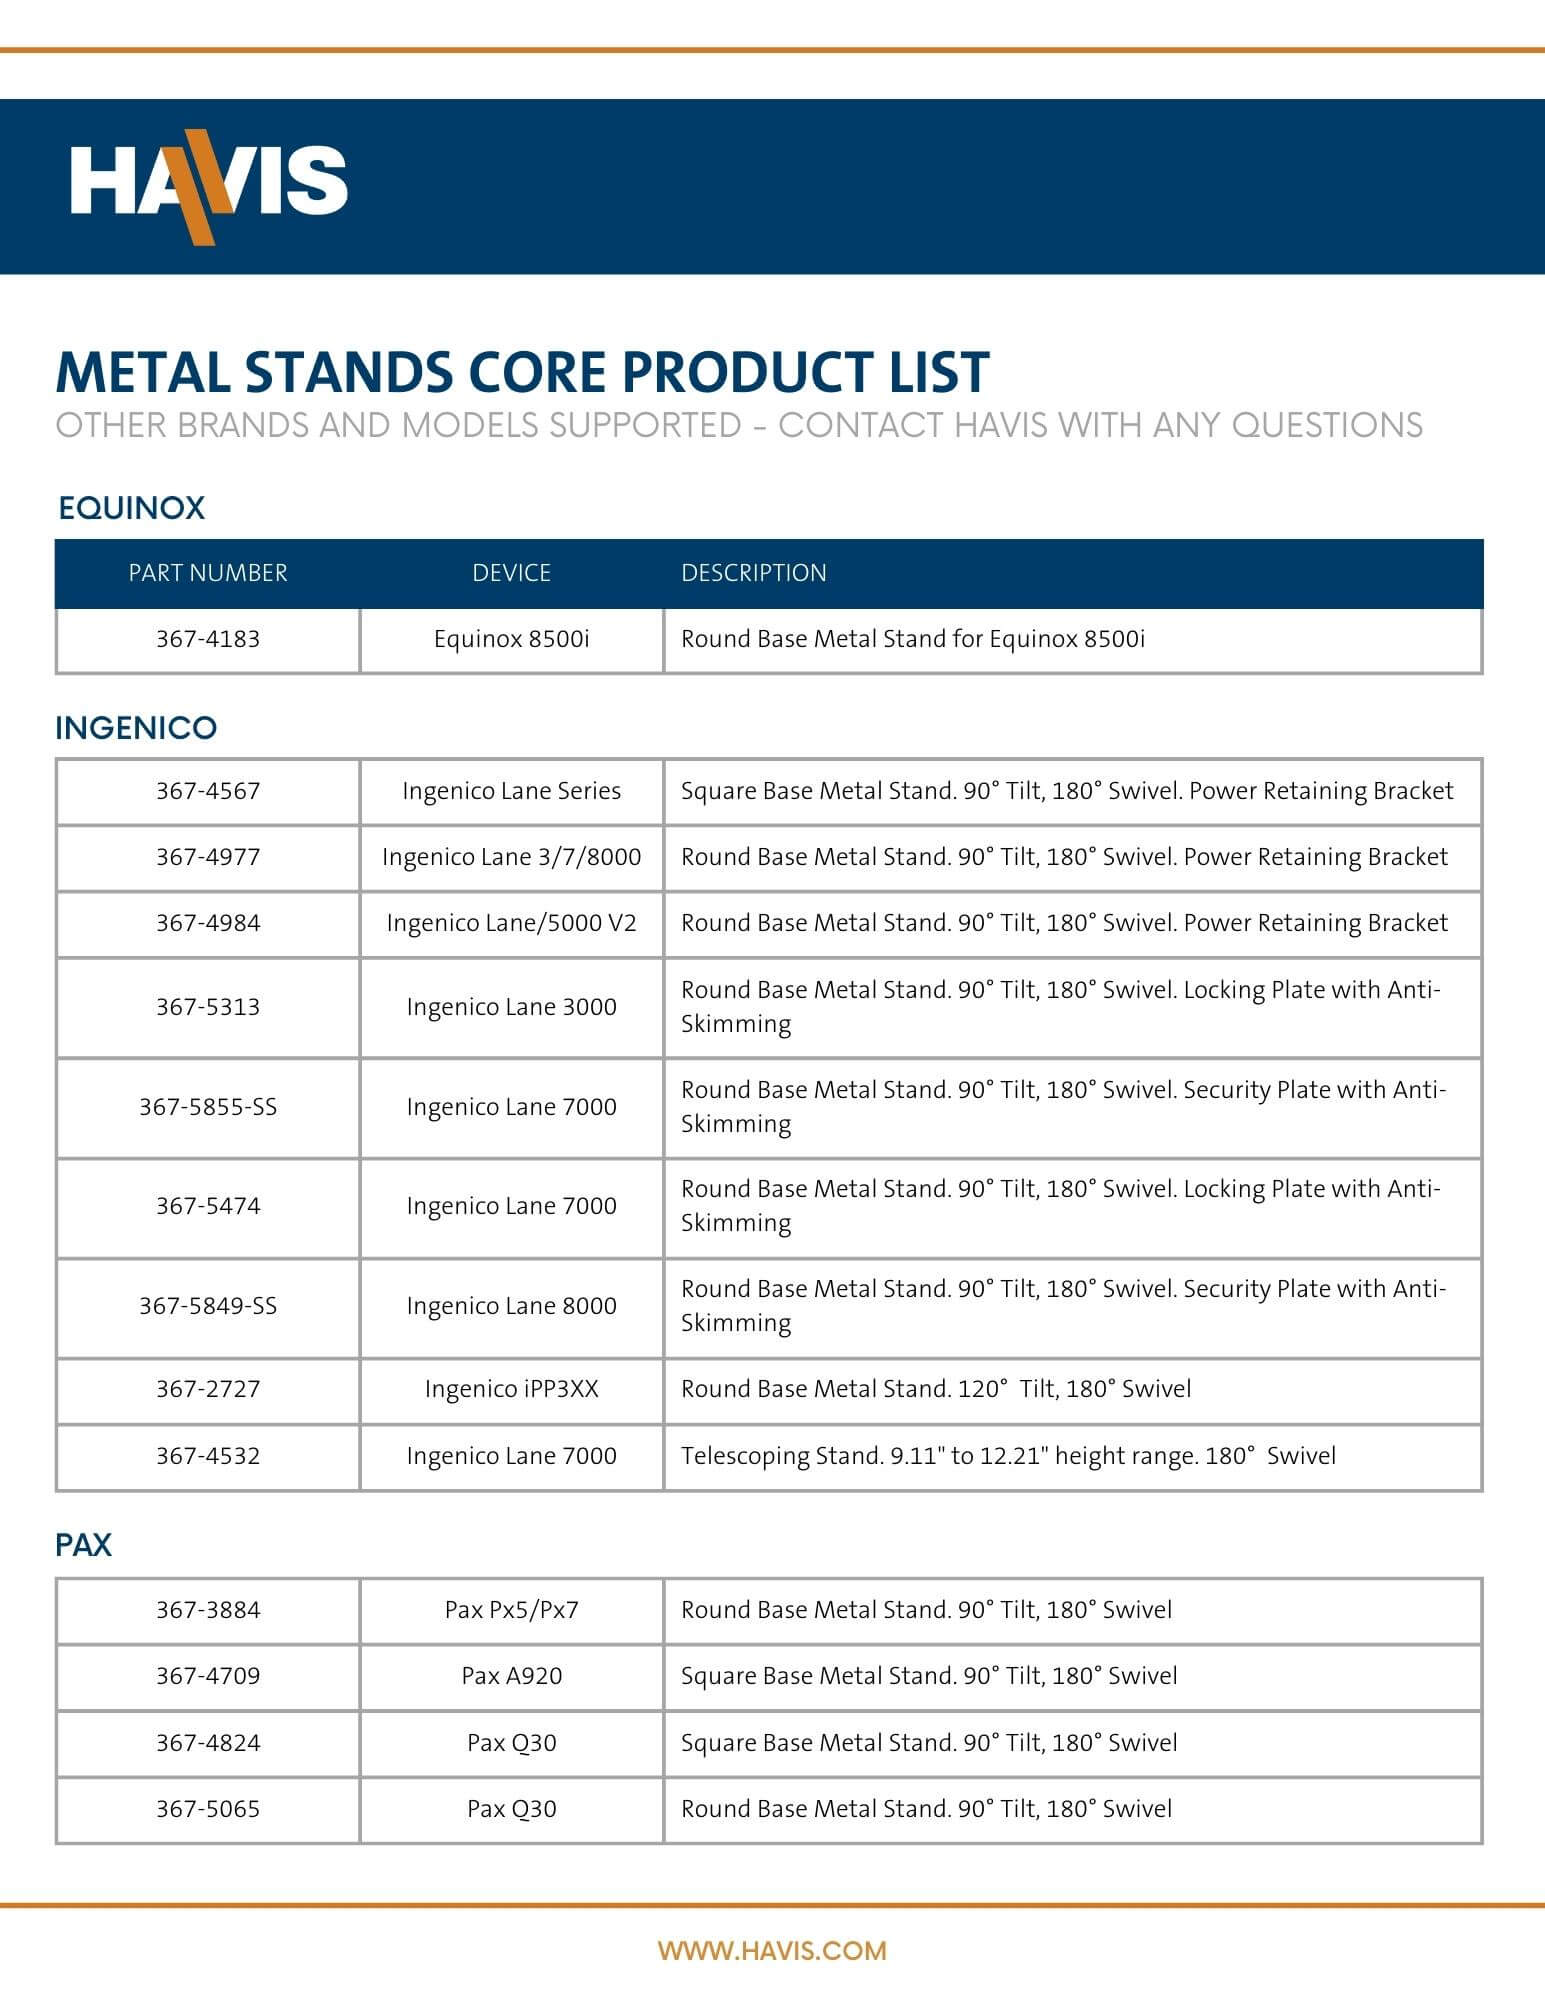 Metal Stands - Full Product List